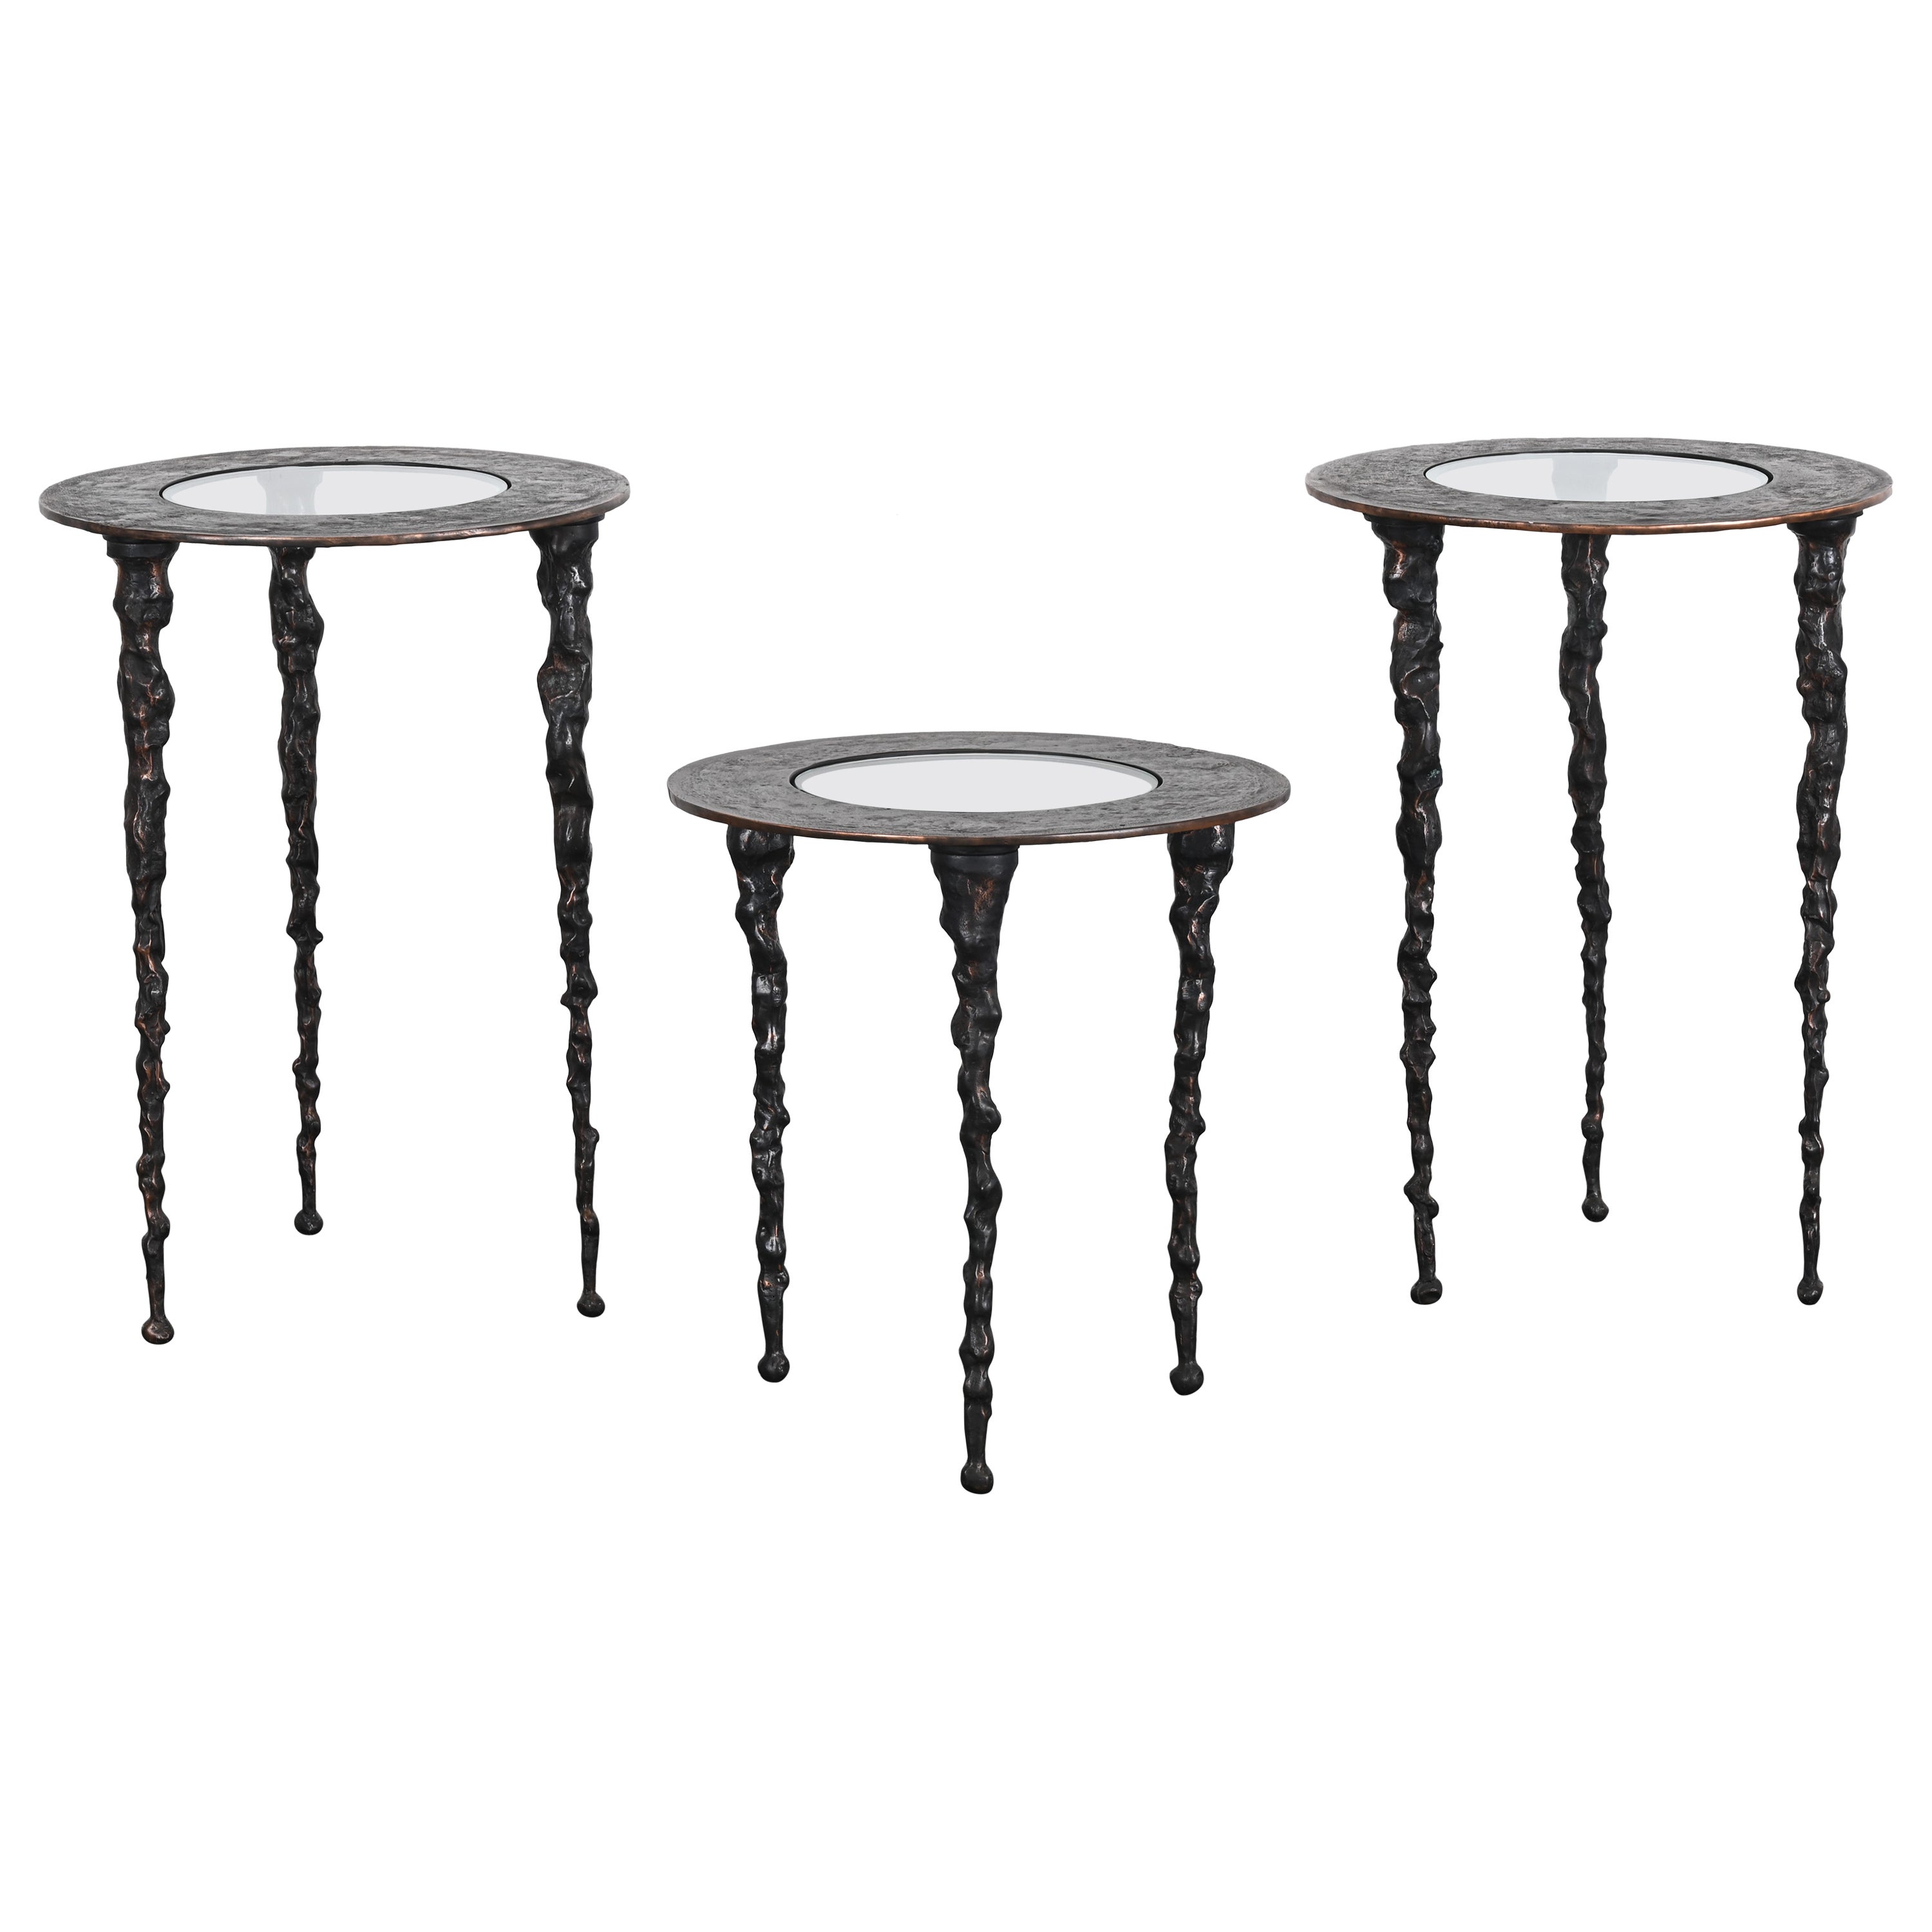 Set of Three  "Lava" Side Tables by Michael Aram, 1995 For Sale